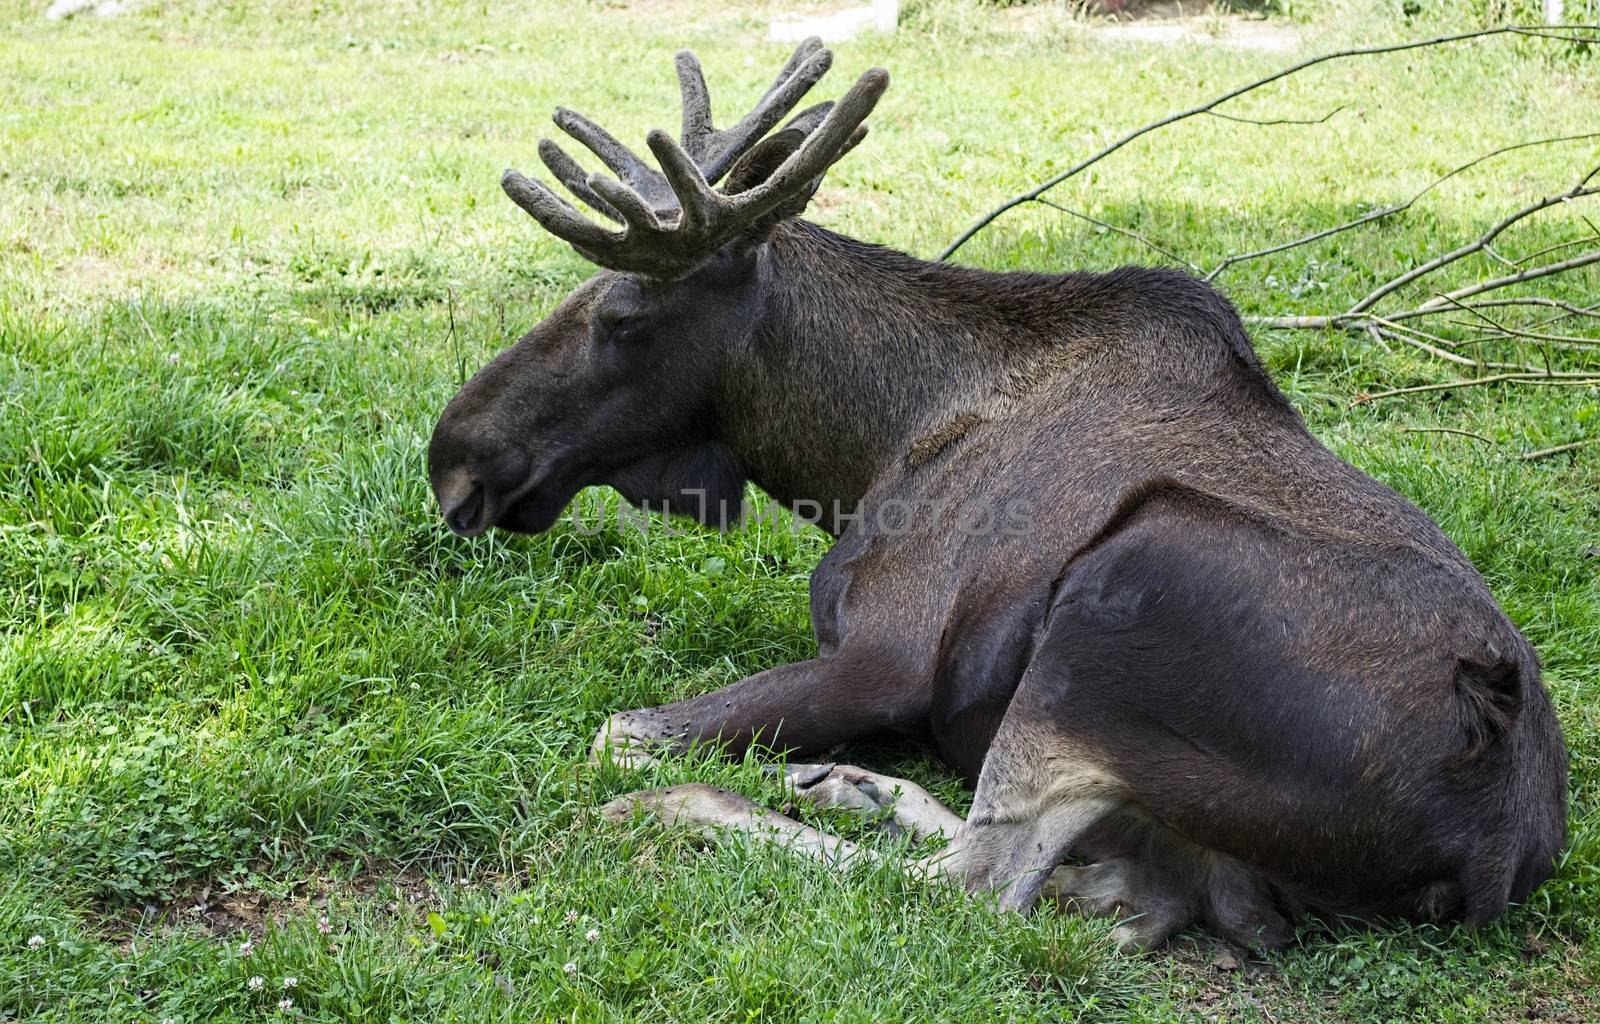 big old moose lying on the grass